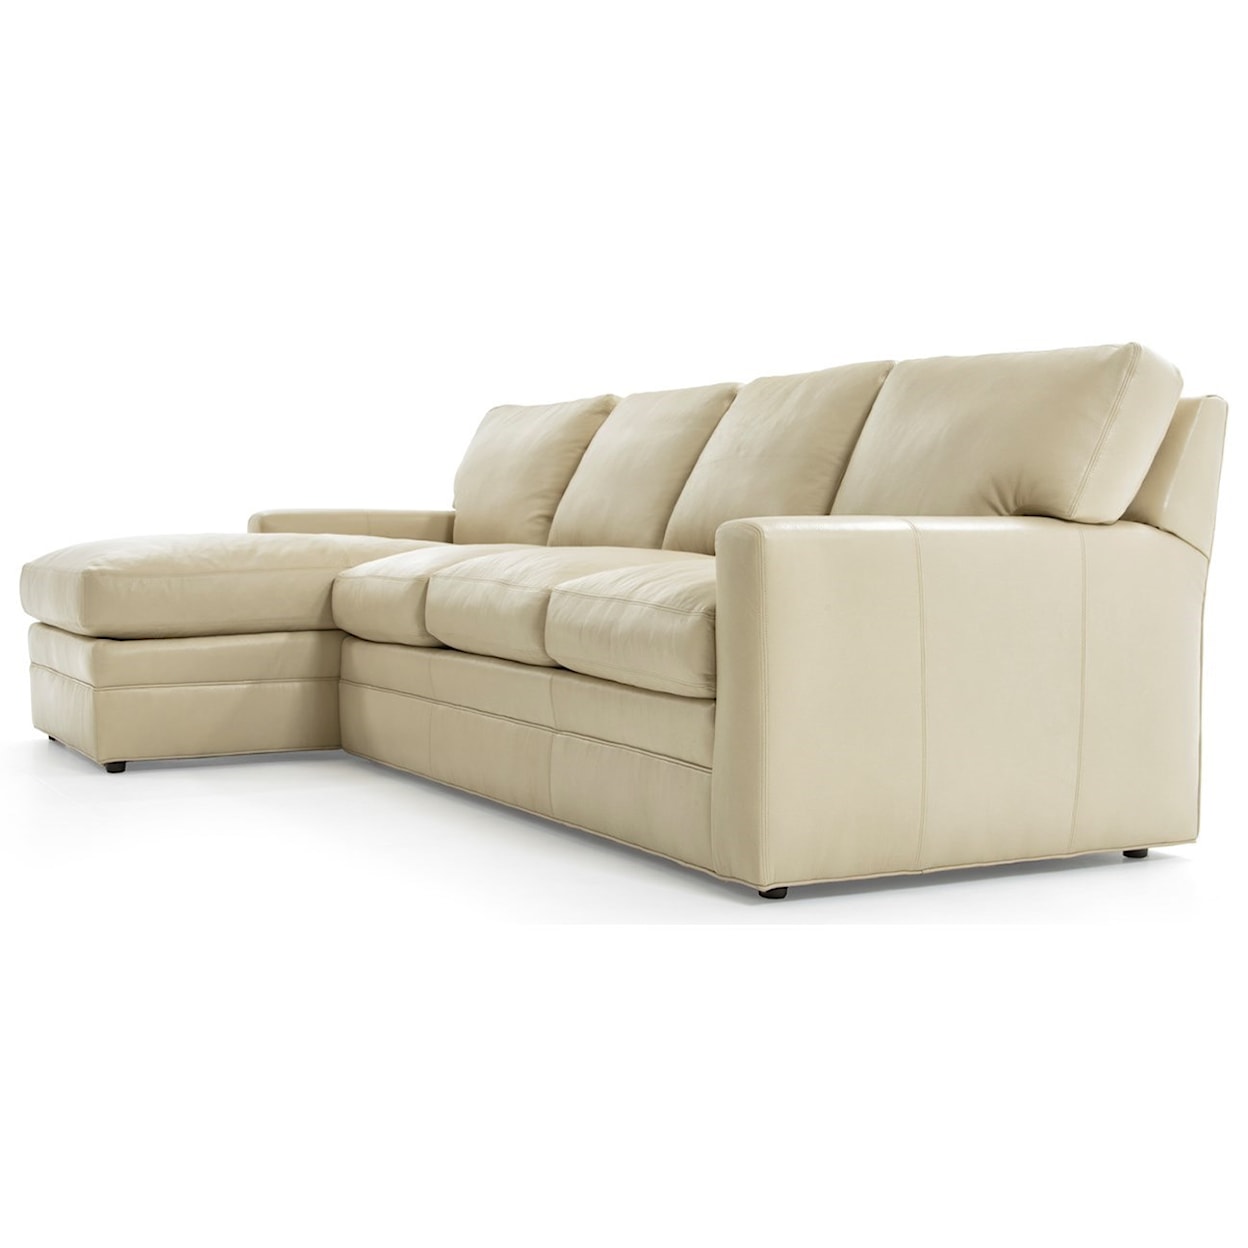 Whittemore-Sherrill 442 2 Pc L-Shape Sectional Sofa w/ LAF Chaise